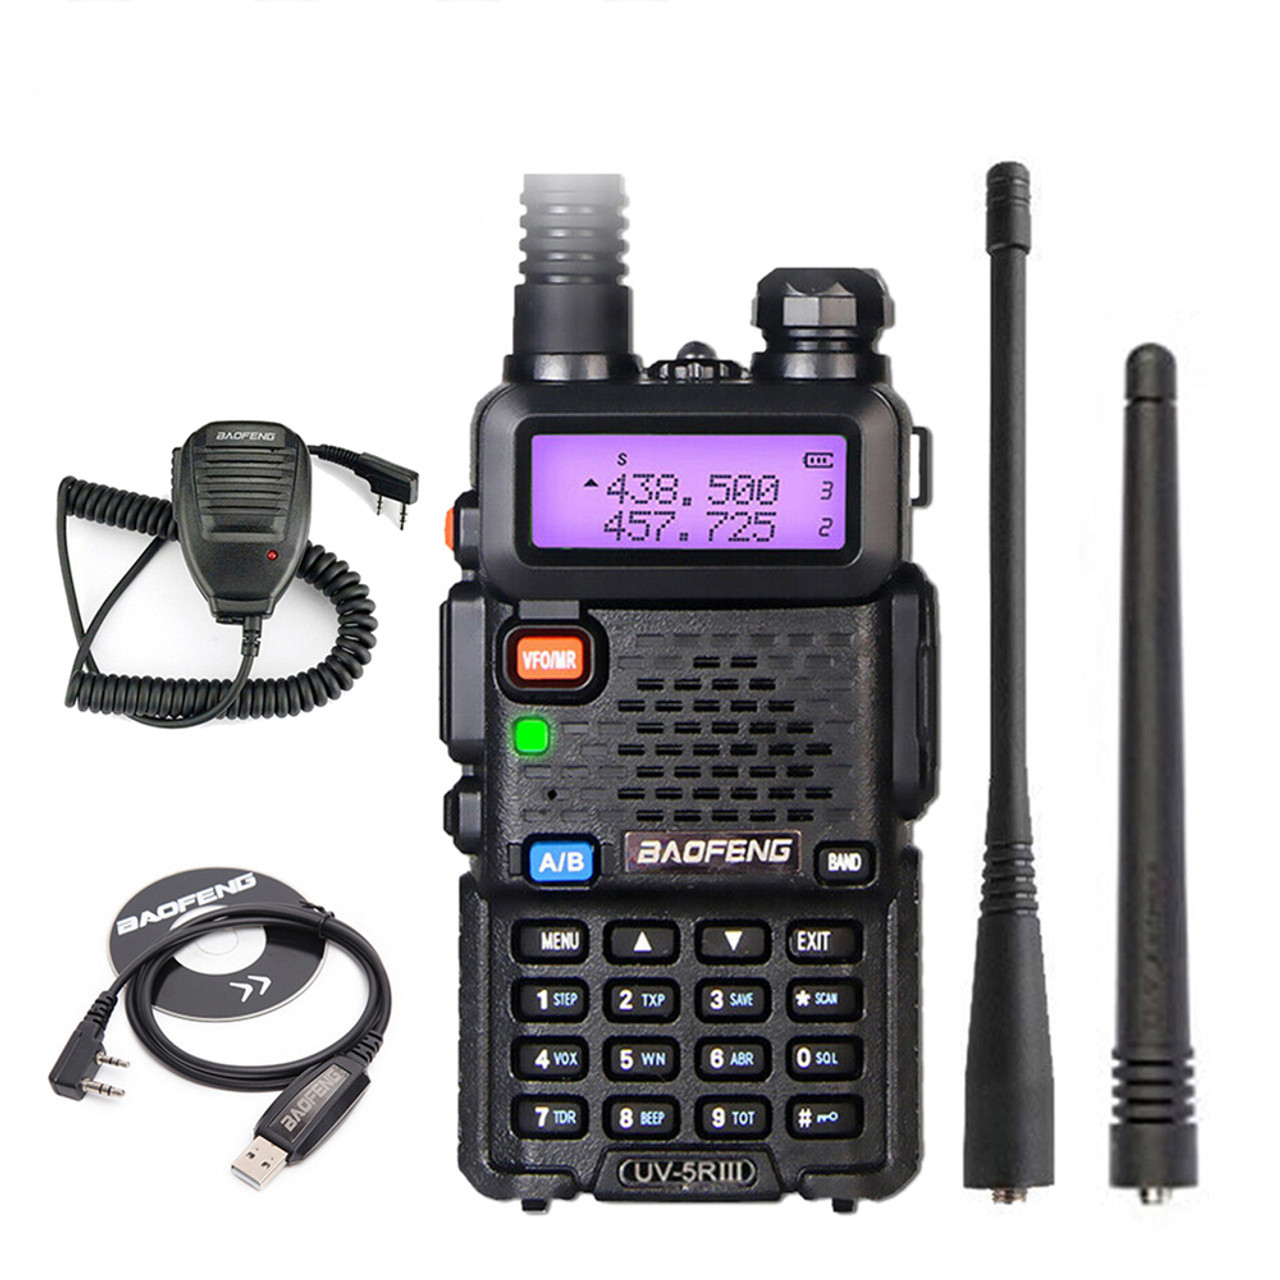 The Baofeng UV-5R III with Programming cable Handheld Mic